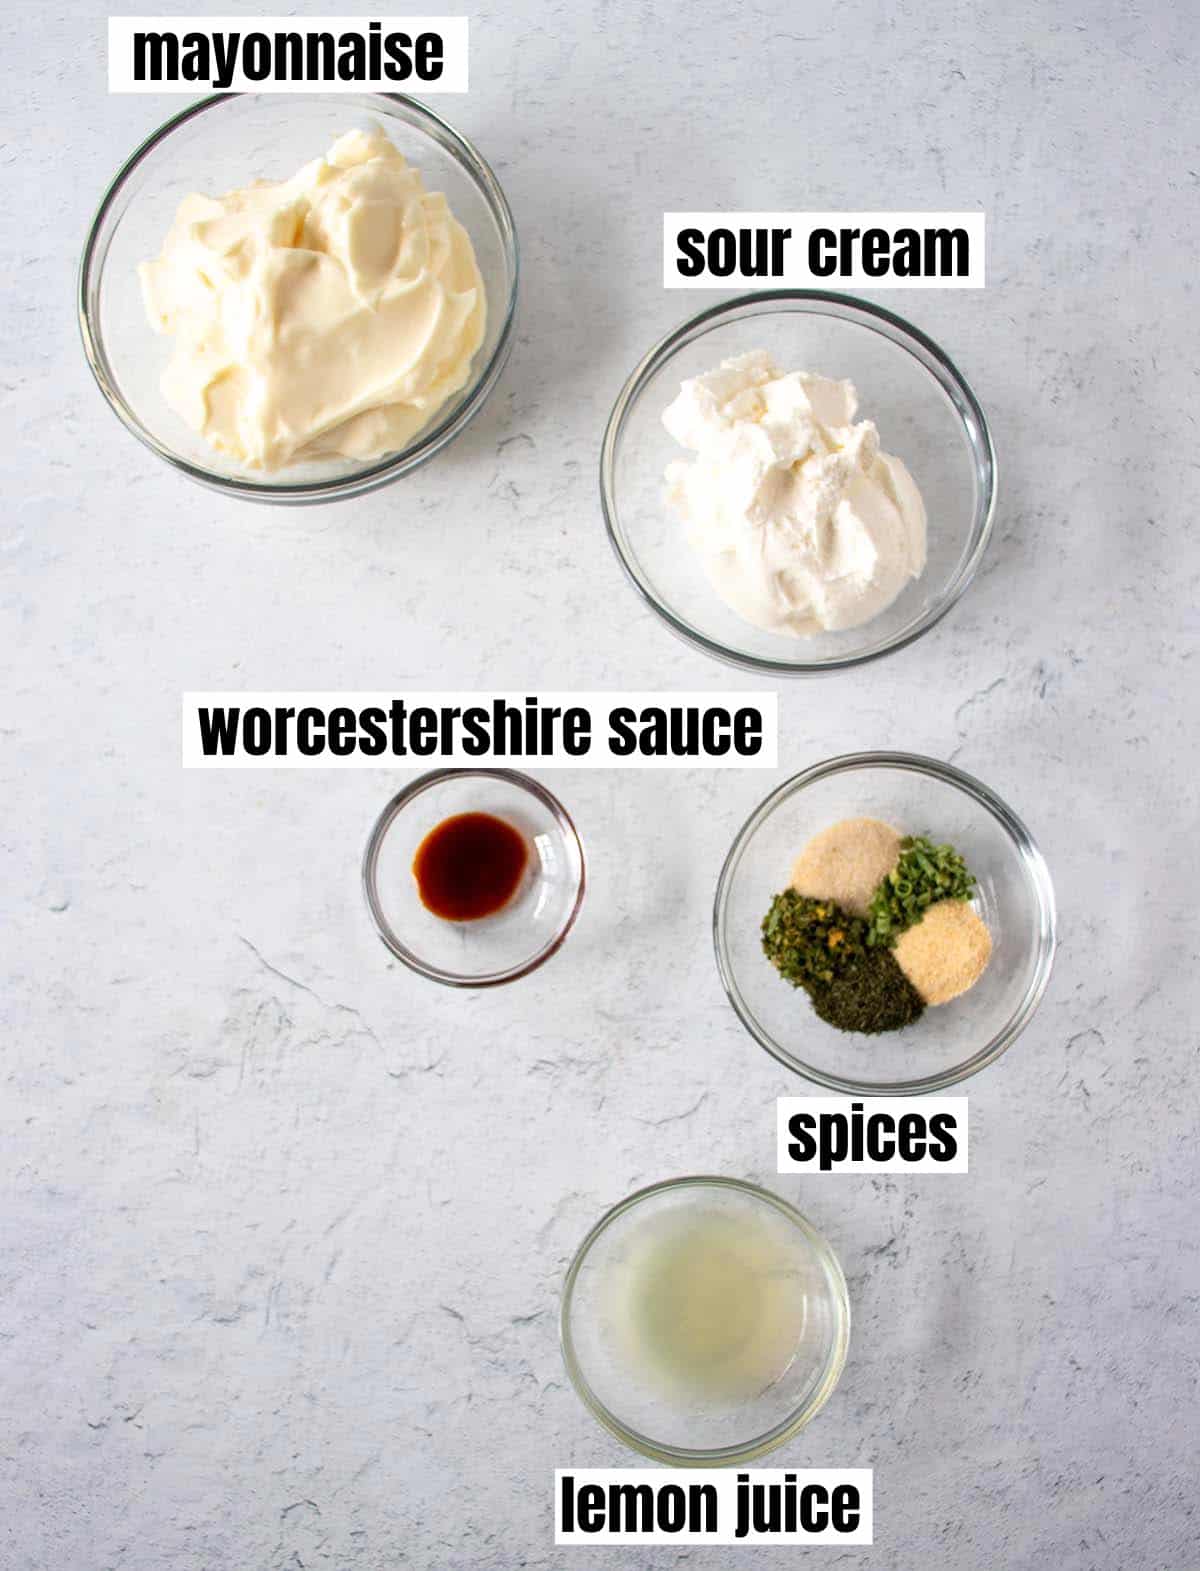 ingredients in homemade ranch dip including mayo, sour cream, worcestershire sauce, spices, and lemon juice.